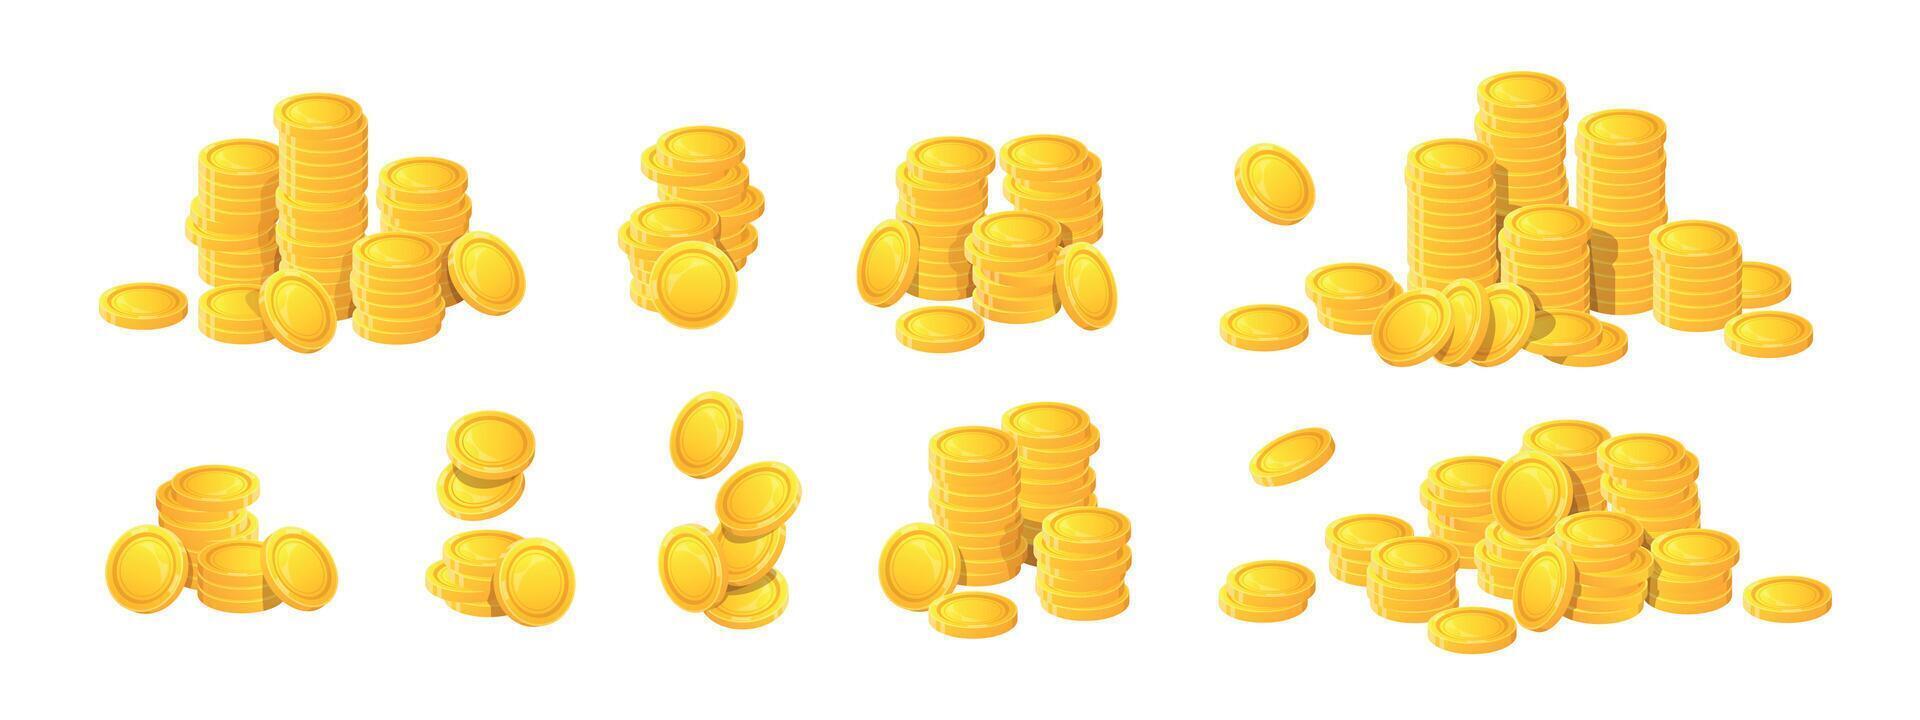 Golden coins stacks. Cartoon interface elements for online web casino and mobile application, reward game art. Vector isolated set